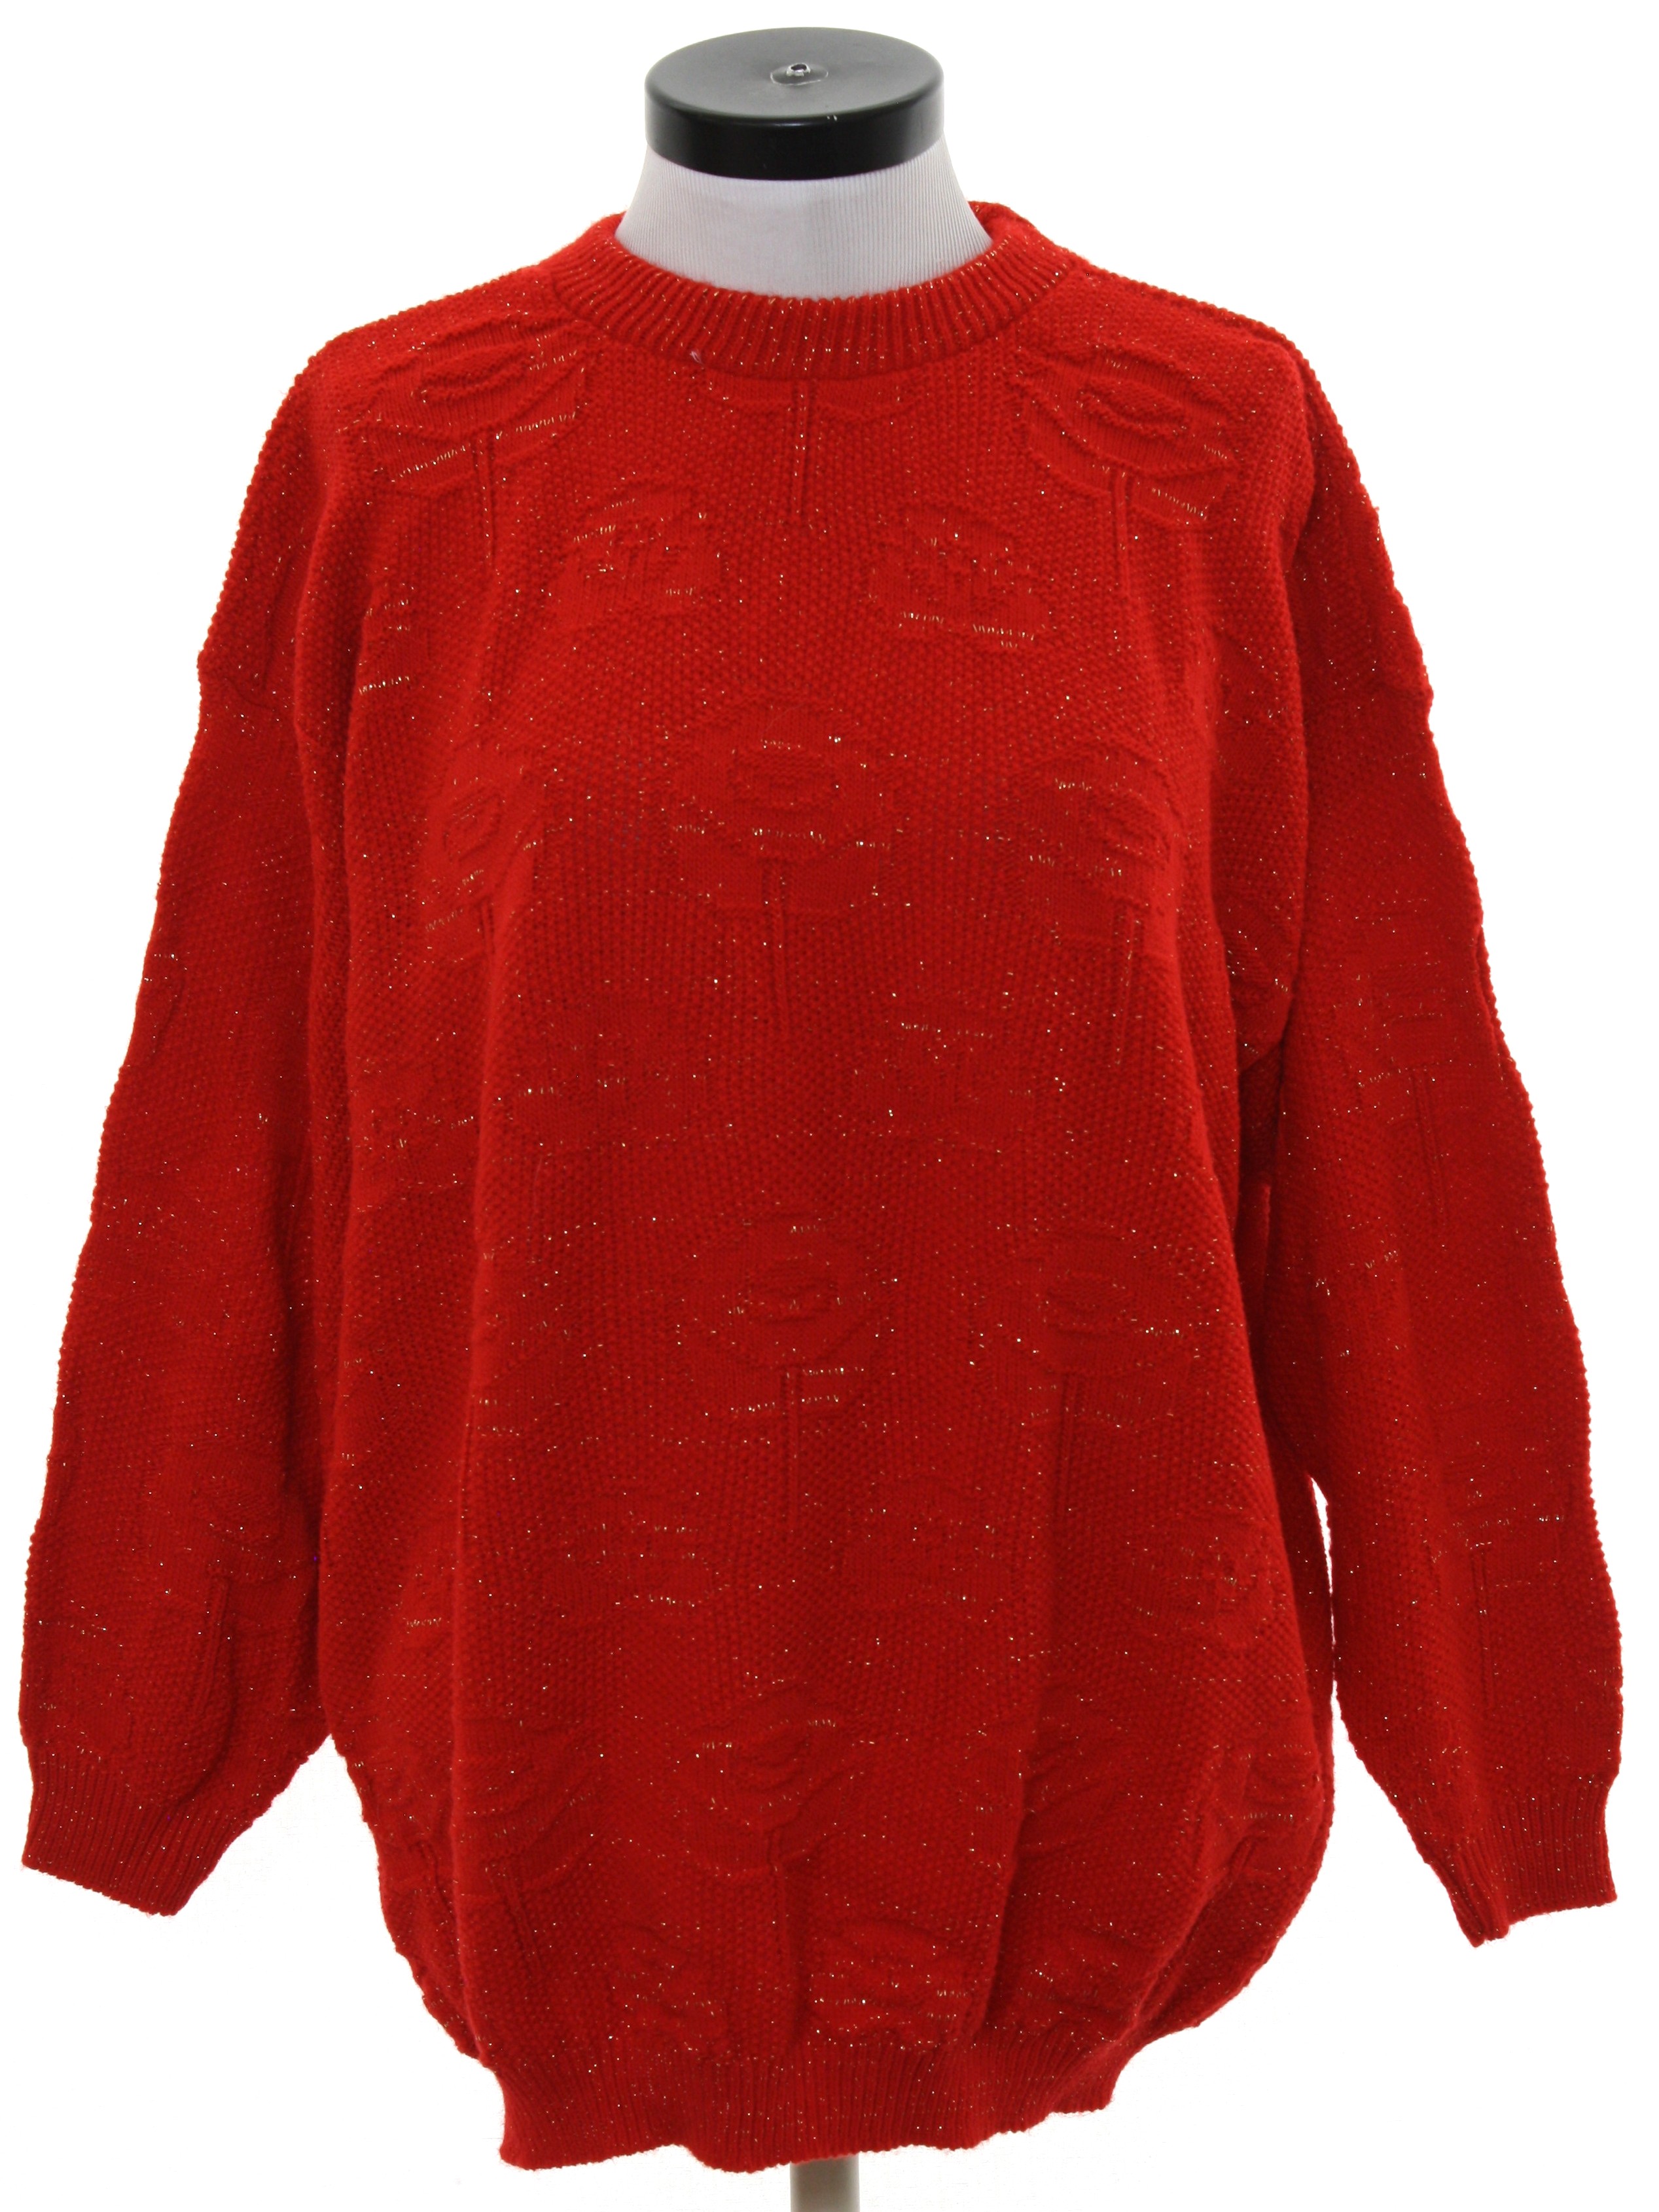 Retro 1980's Sweater (Rose) : 80s -Rose- Womens red acrylic pullover ...